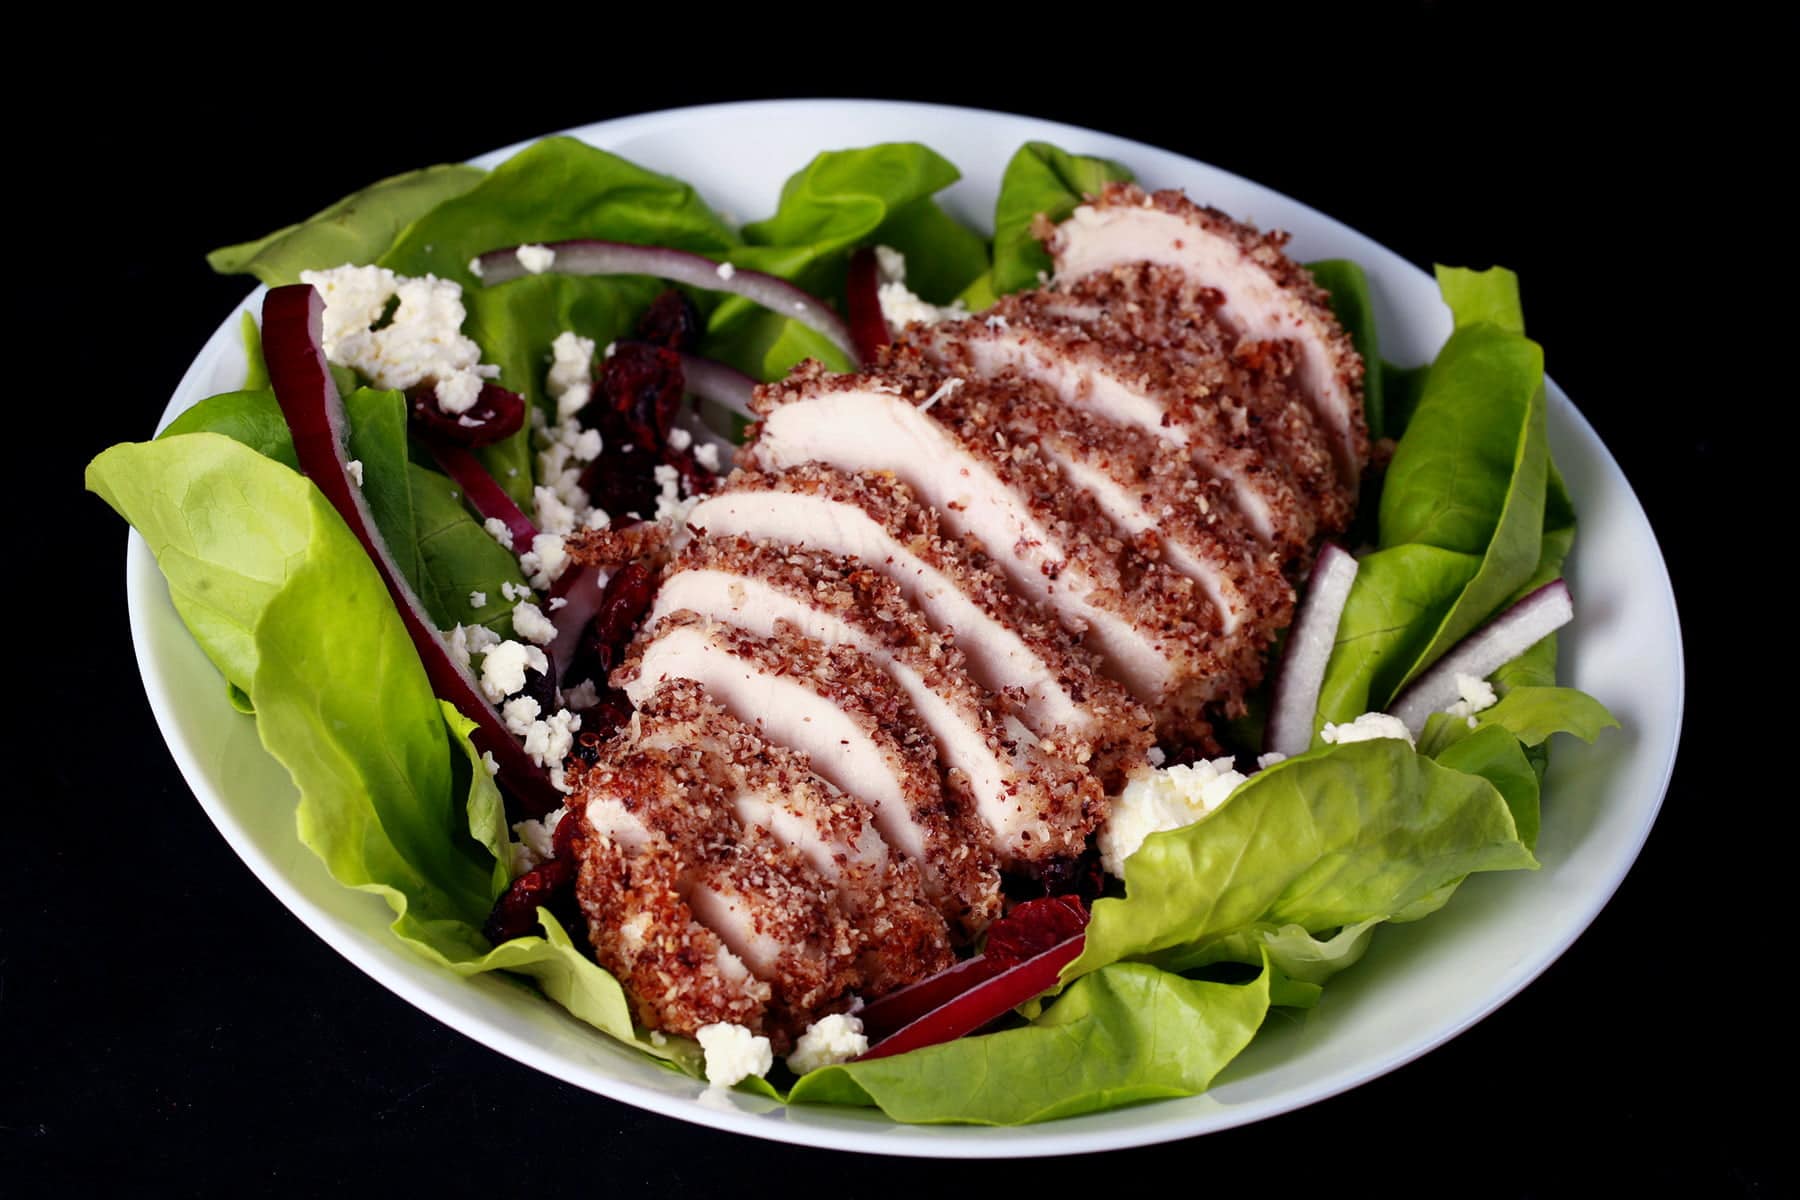 A sliced hazelnut crusted chicken breast sits a top a salad of greens, pear slices, dried cranberries, red onion slices, and feta.